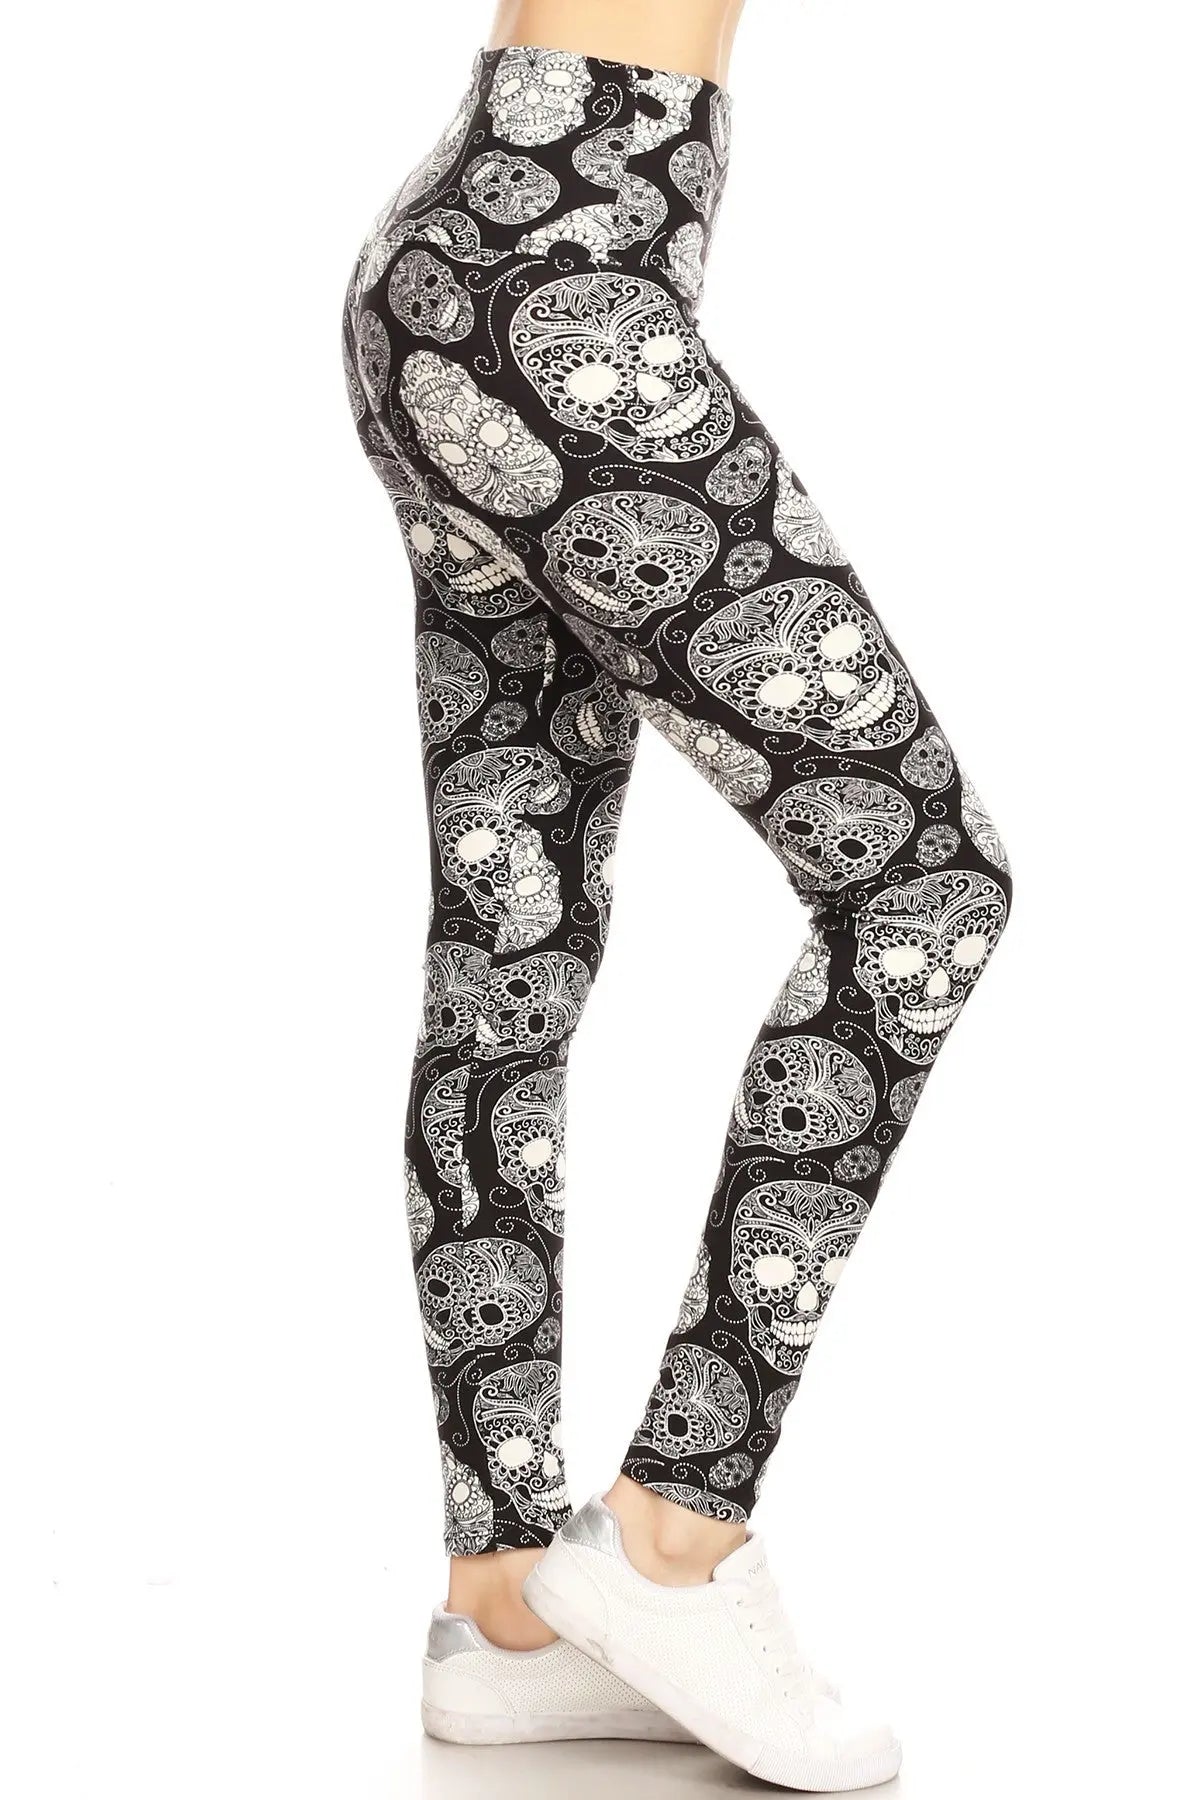 Long Yoga Style Banded Lined Skull Printed Knit Legging With High Waist Sunny EvE Fashion